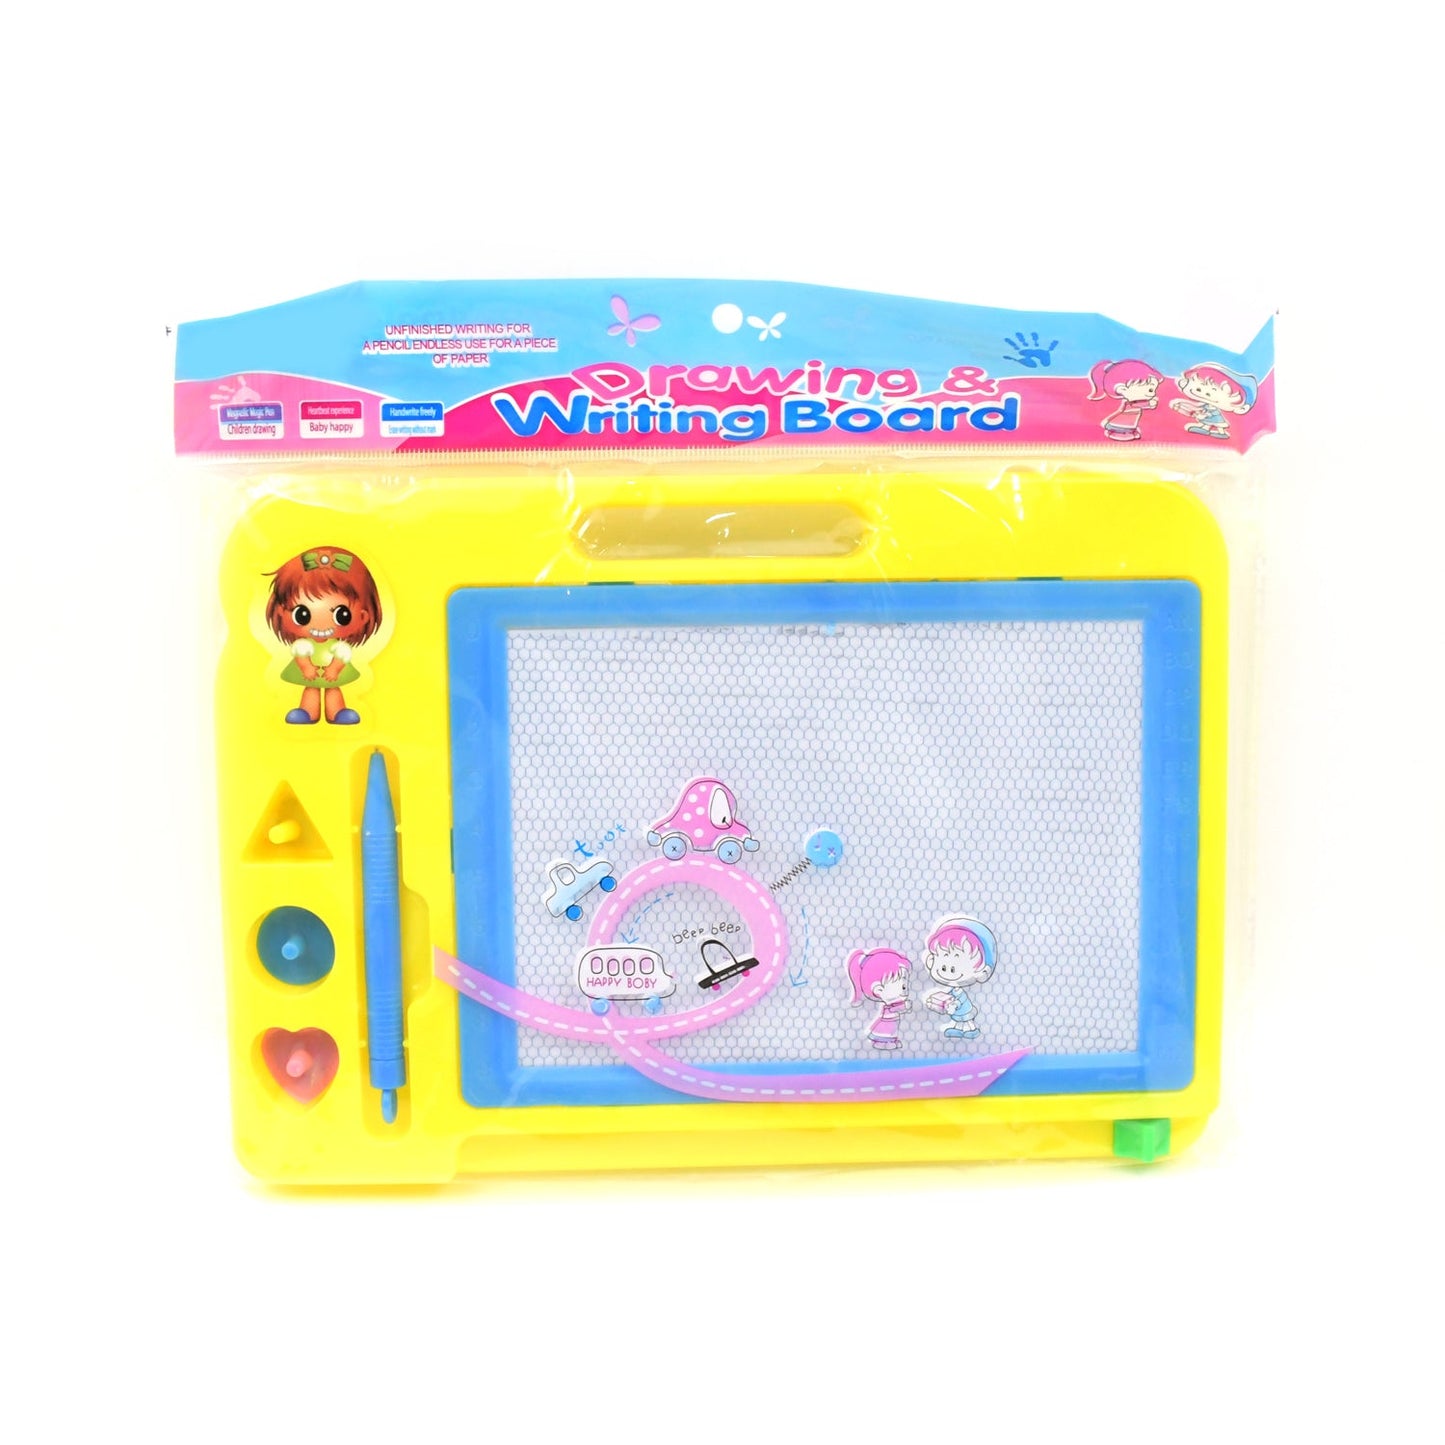 1902 Children Magic Slate Pen Doodle Pad Erasable Drawing Easy Reading Writing Learning Graffiti Board Kids Gift Toy Magnetic Painting Sketch Pad for Baby Children (1 Pc Mix Color) - deal99.in